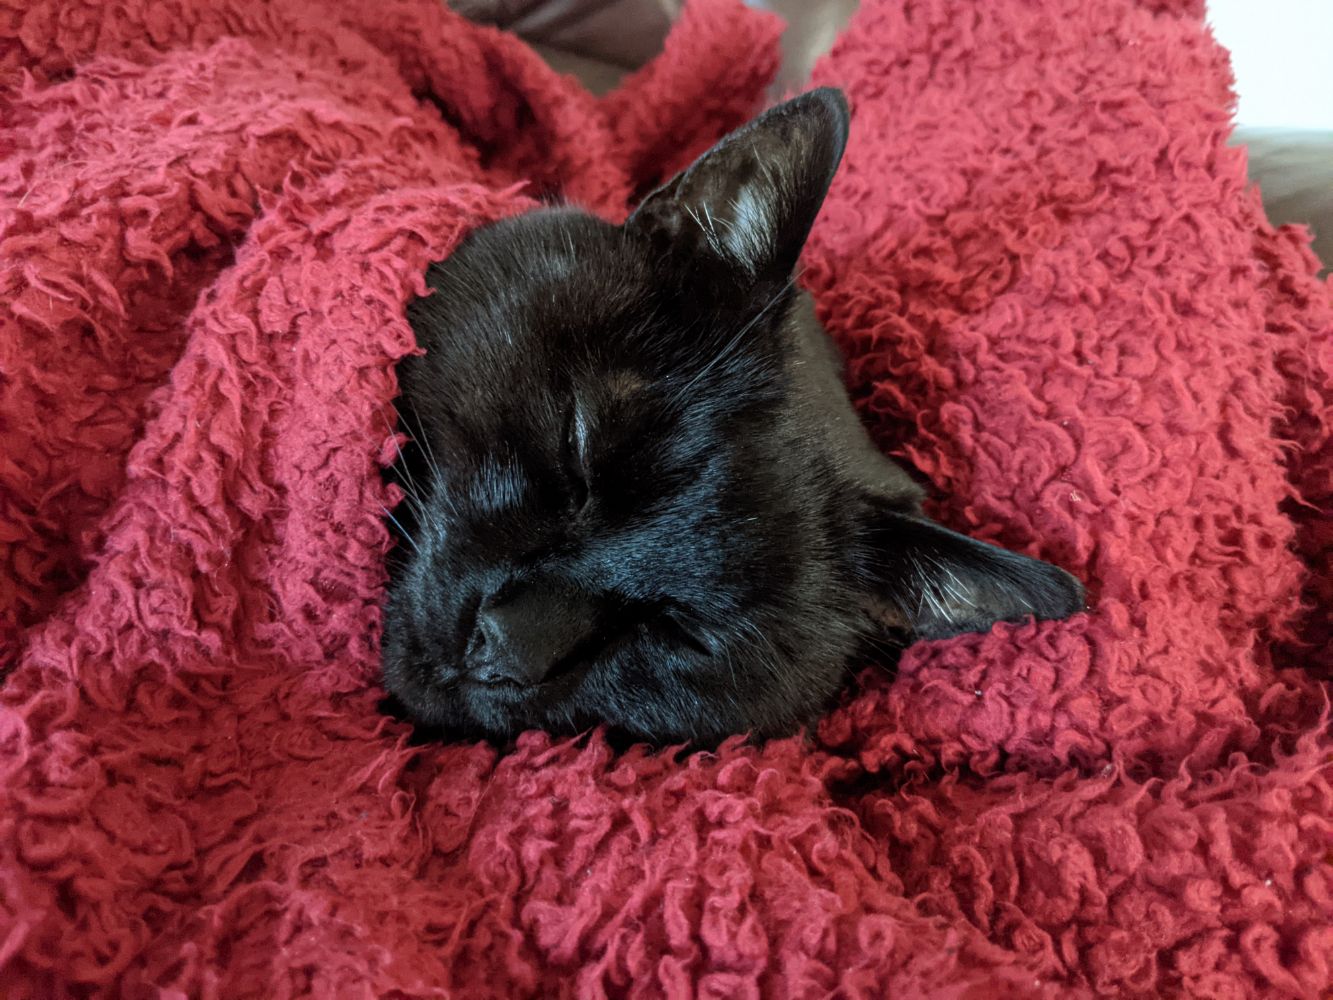 Black cat lying on his side, wrapped completely inside a red blanket, with only his face visible